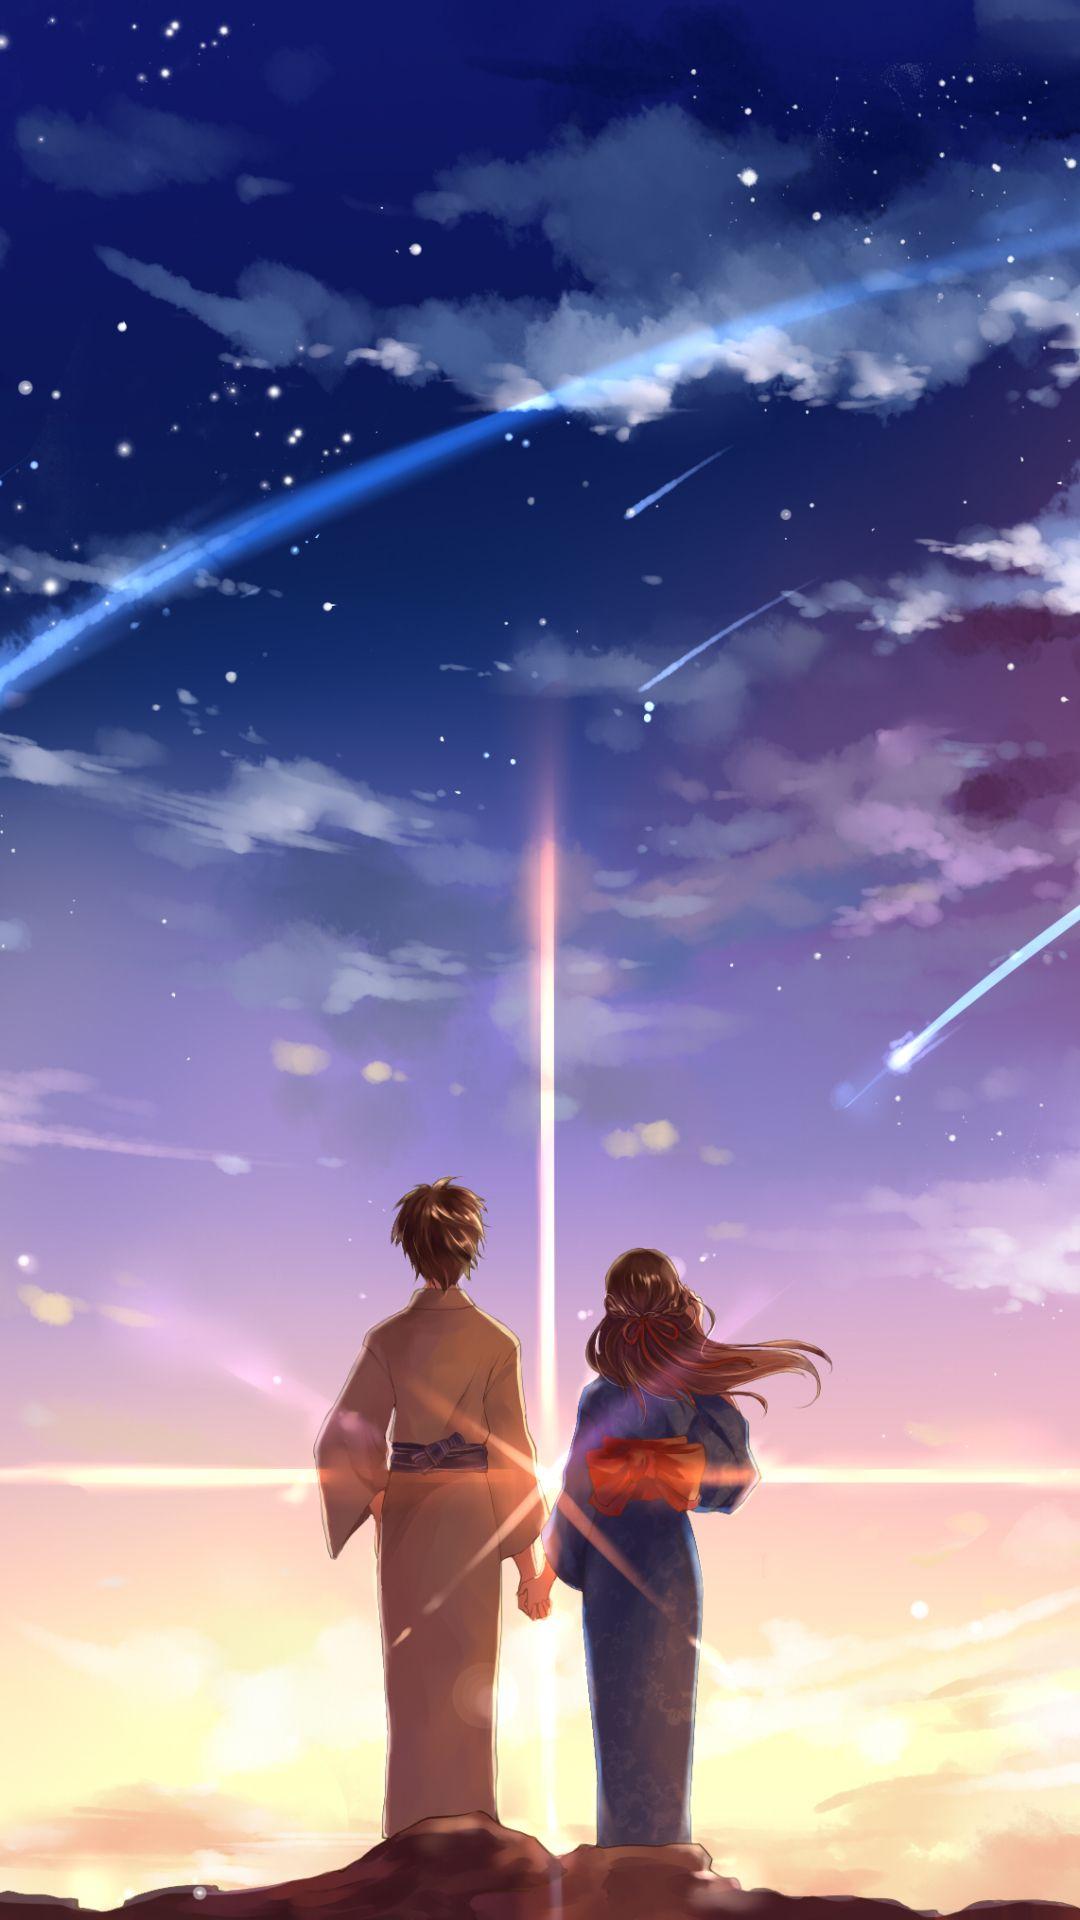 Your Name. Apple IPhone 6S Plus (1080x1920) Wallpaper